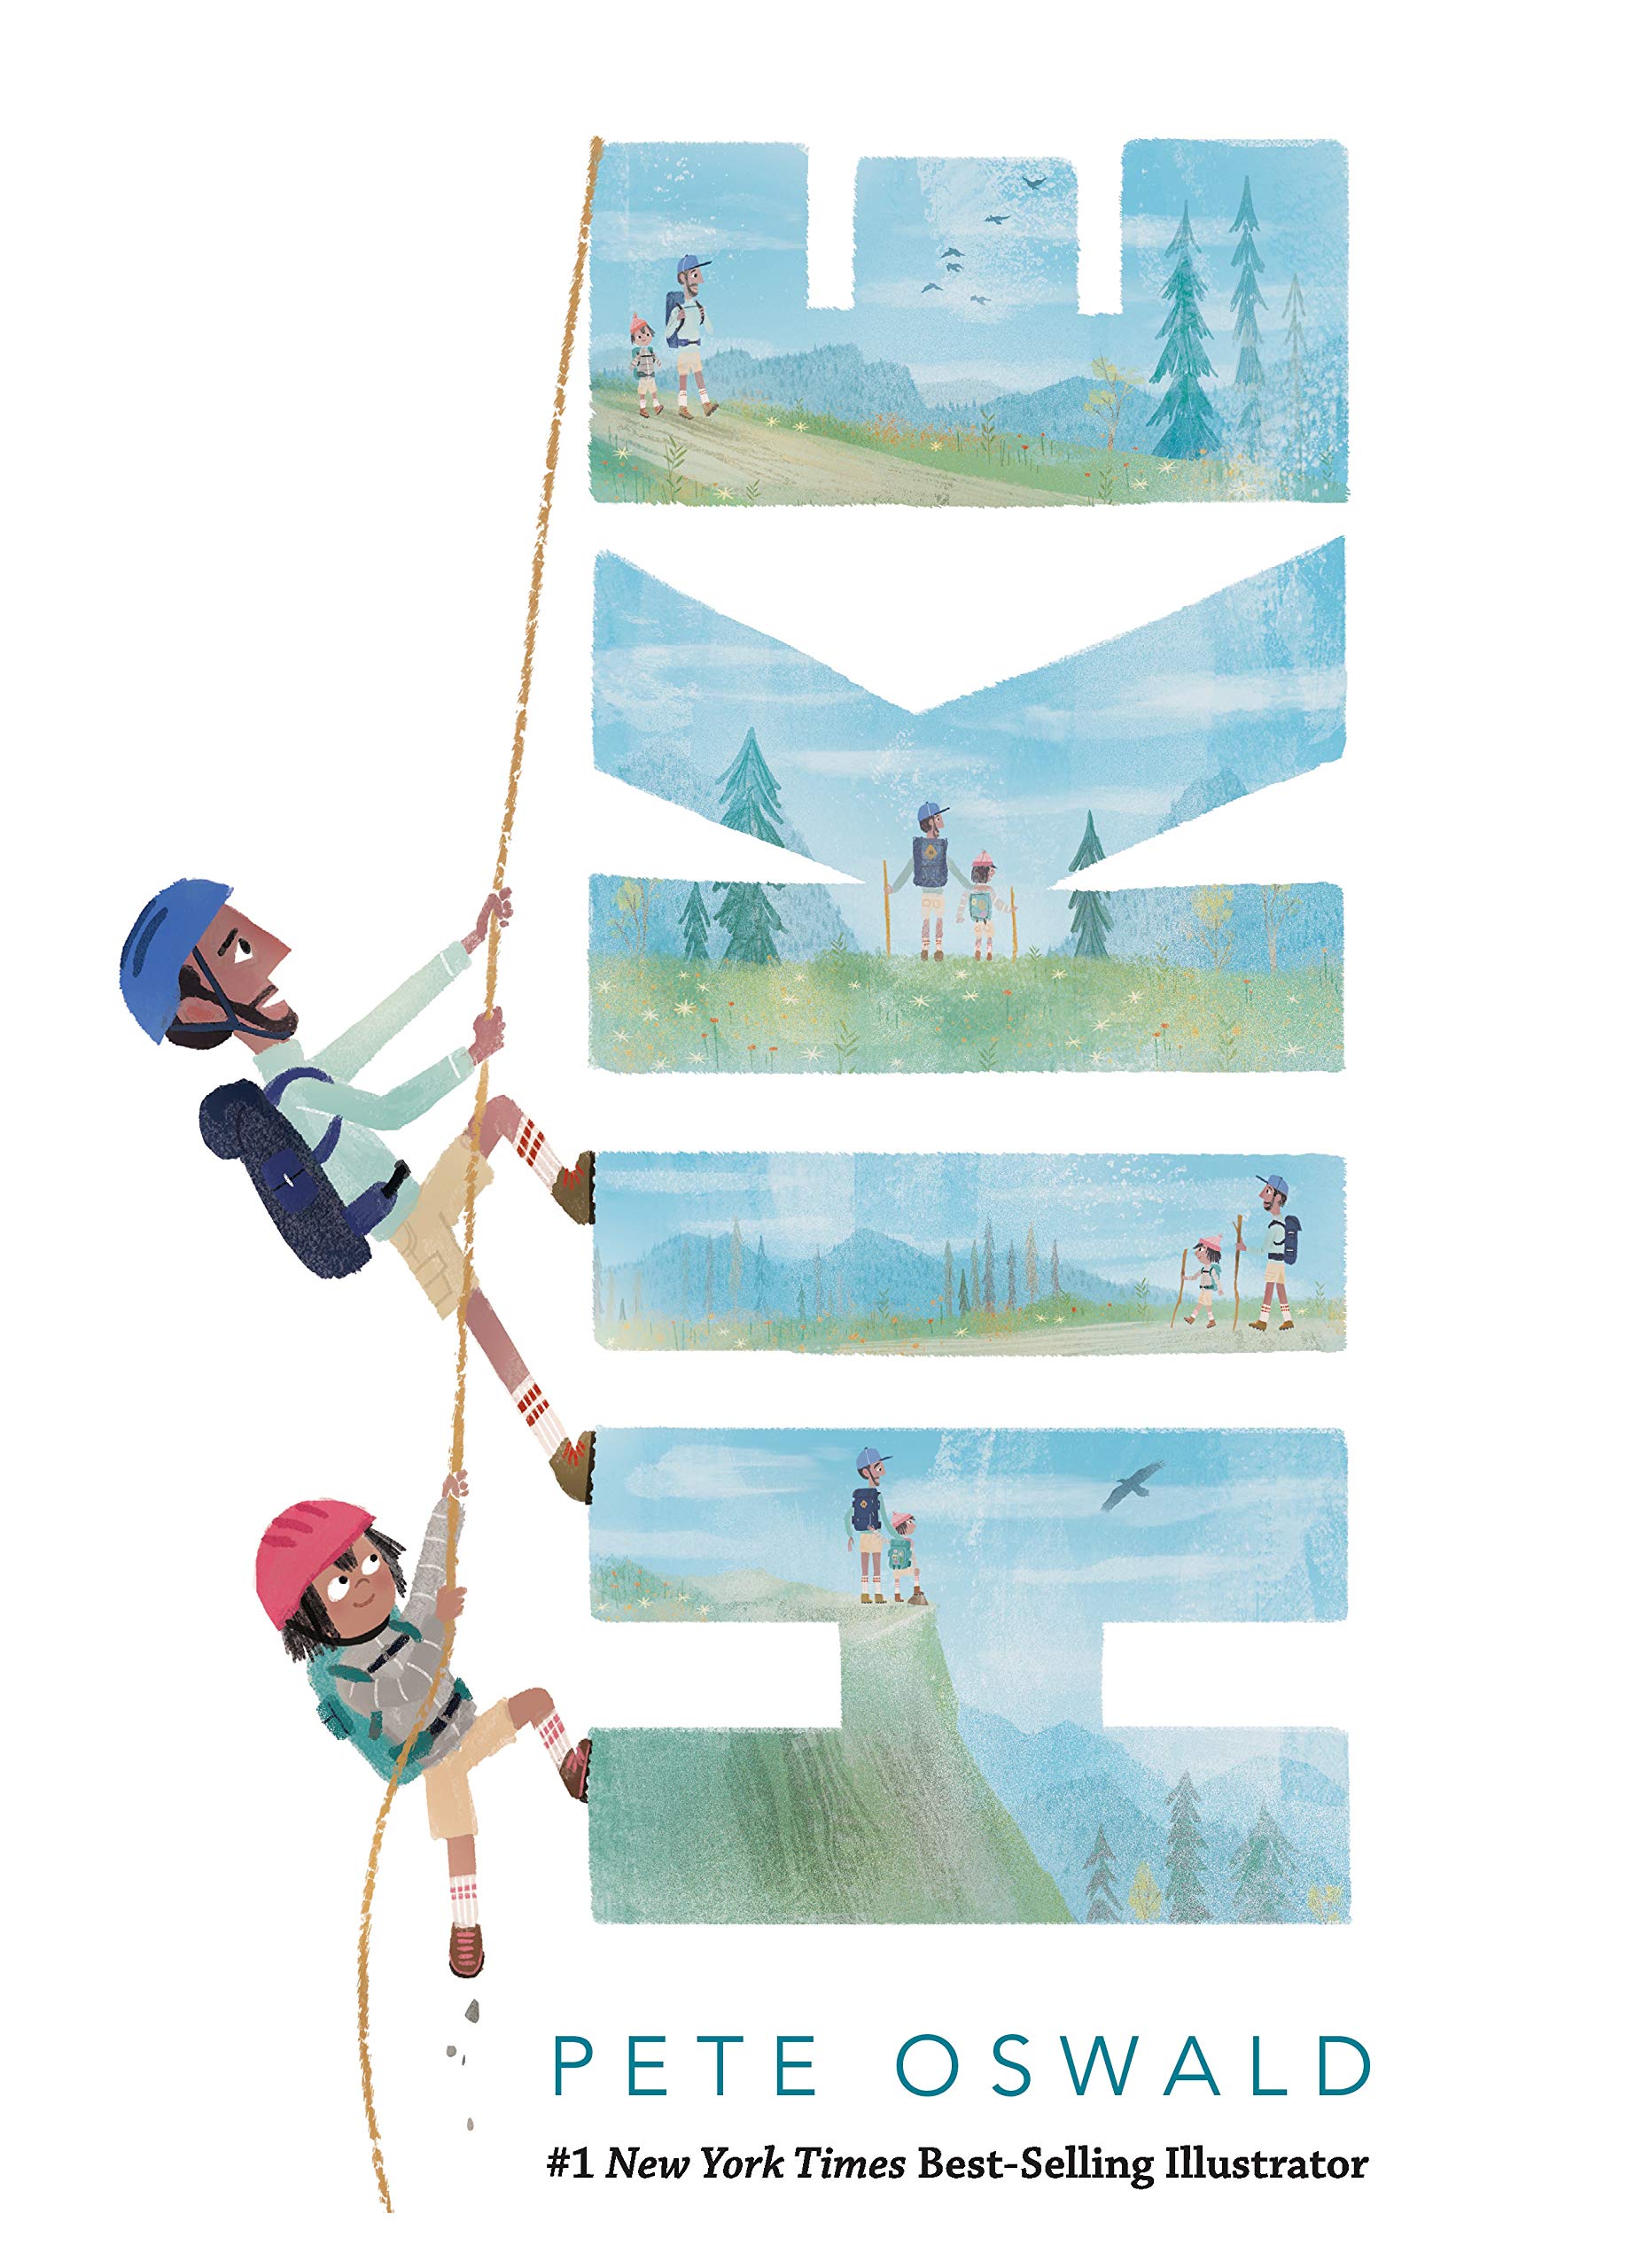 The cover of "Hike" shows a man and a child climbing up the word "hike". It's very cute and pretty.